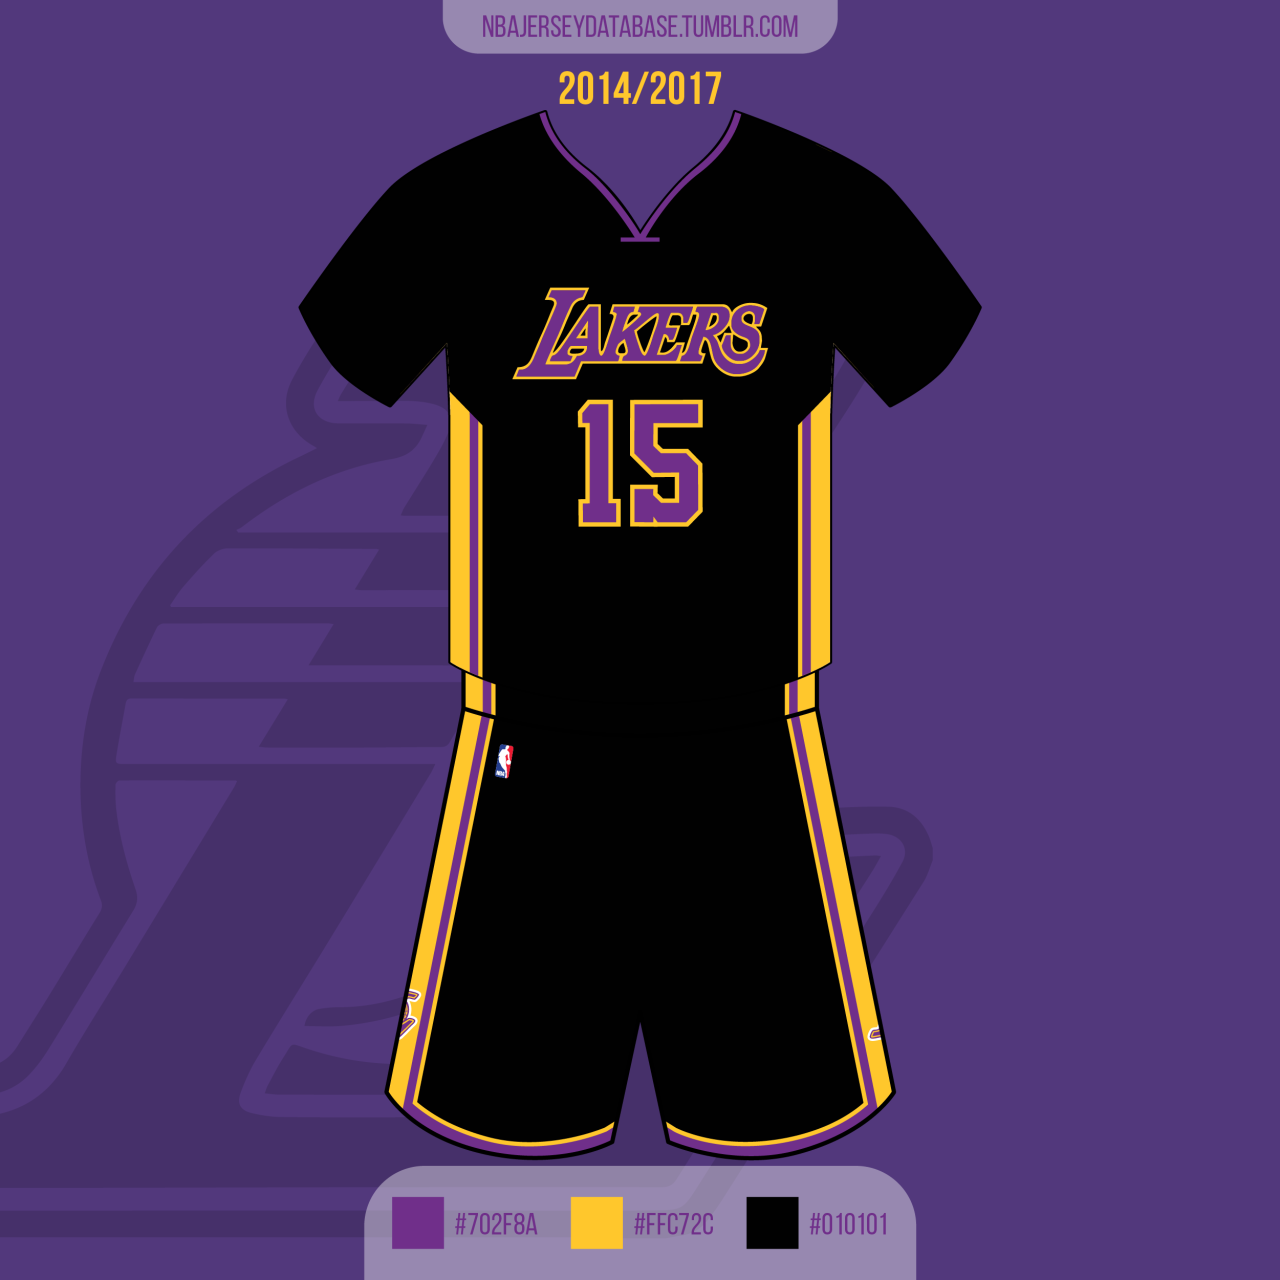 NBA Jersey Database, Los Angeles Lakers Pride Jersey 2014-2017